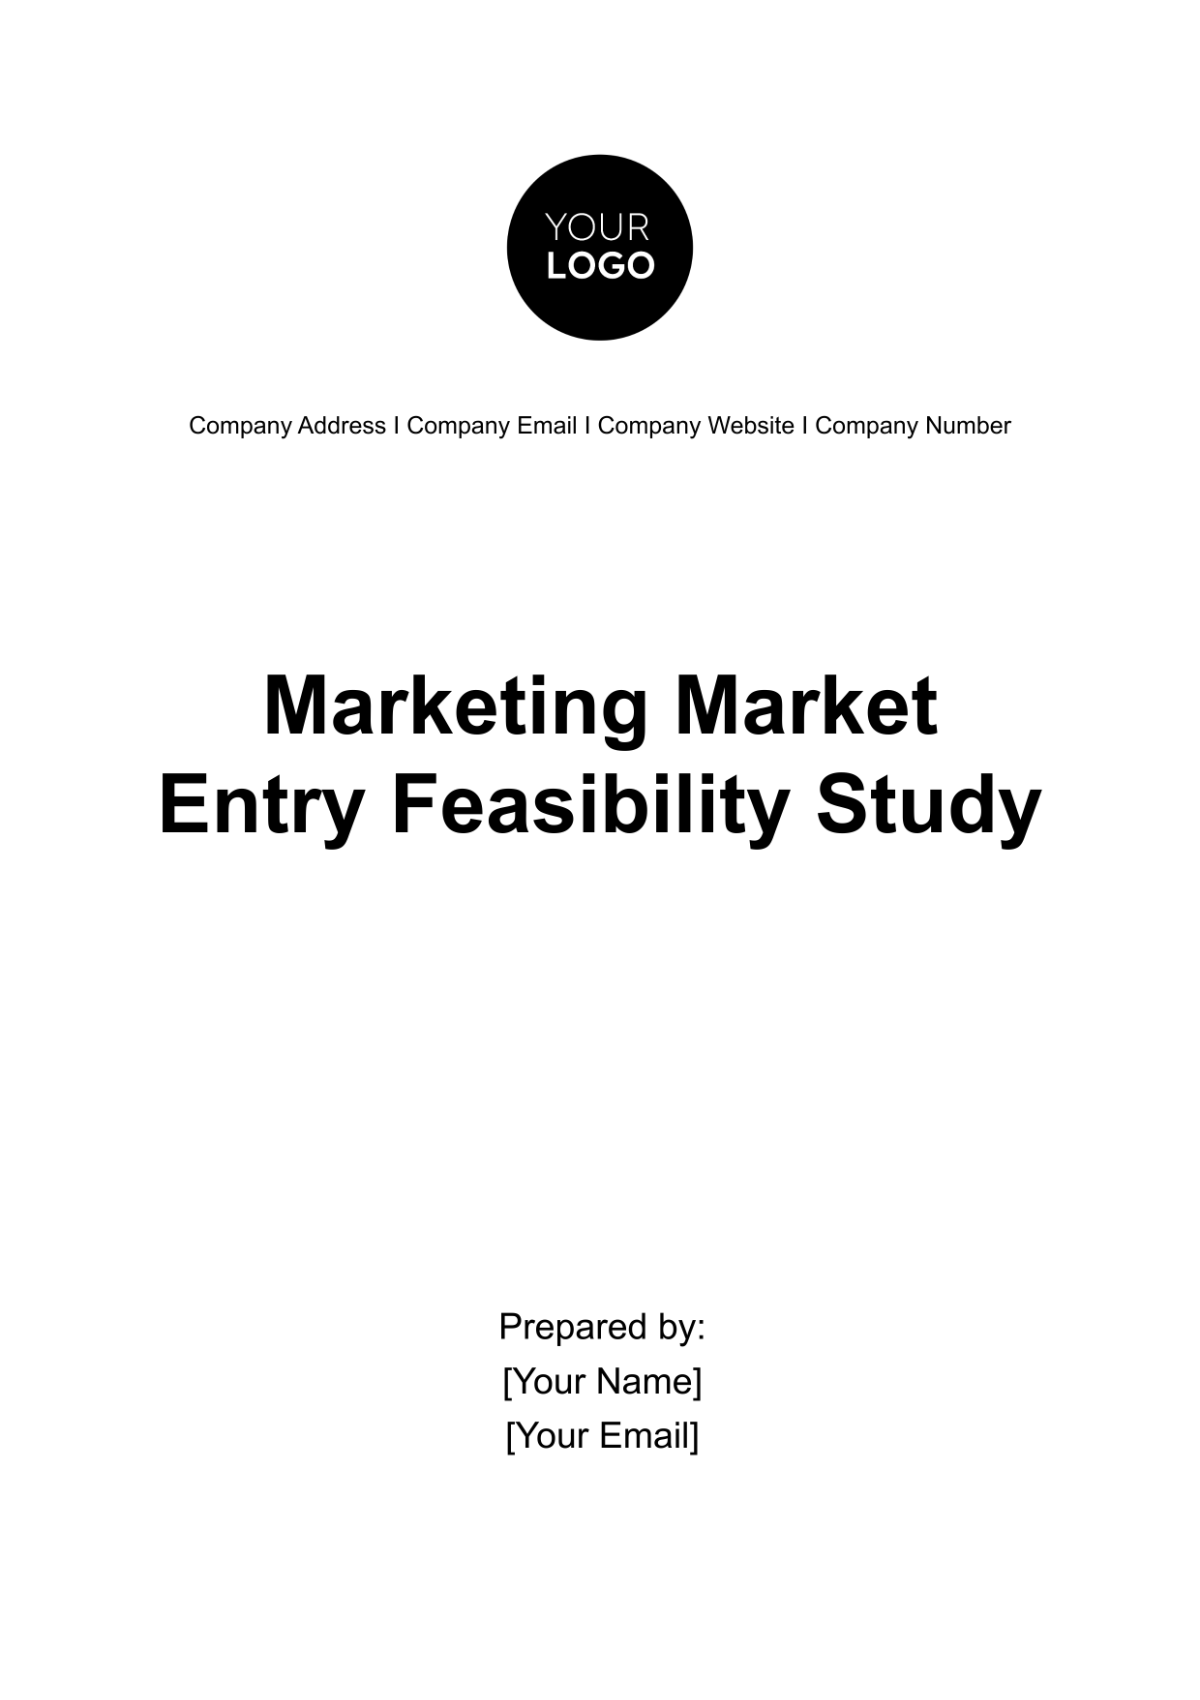 Free Marketing Market Entry Feasibility Study Template